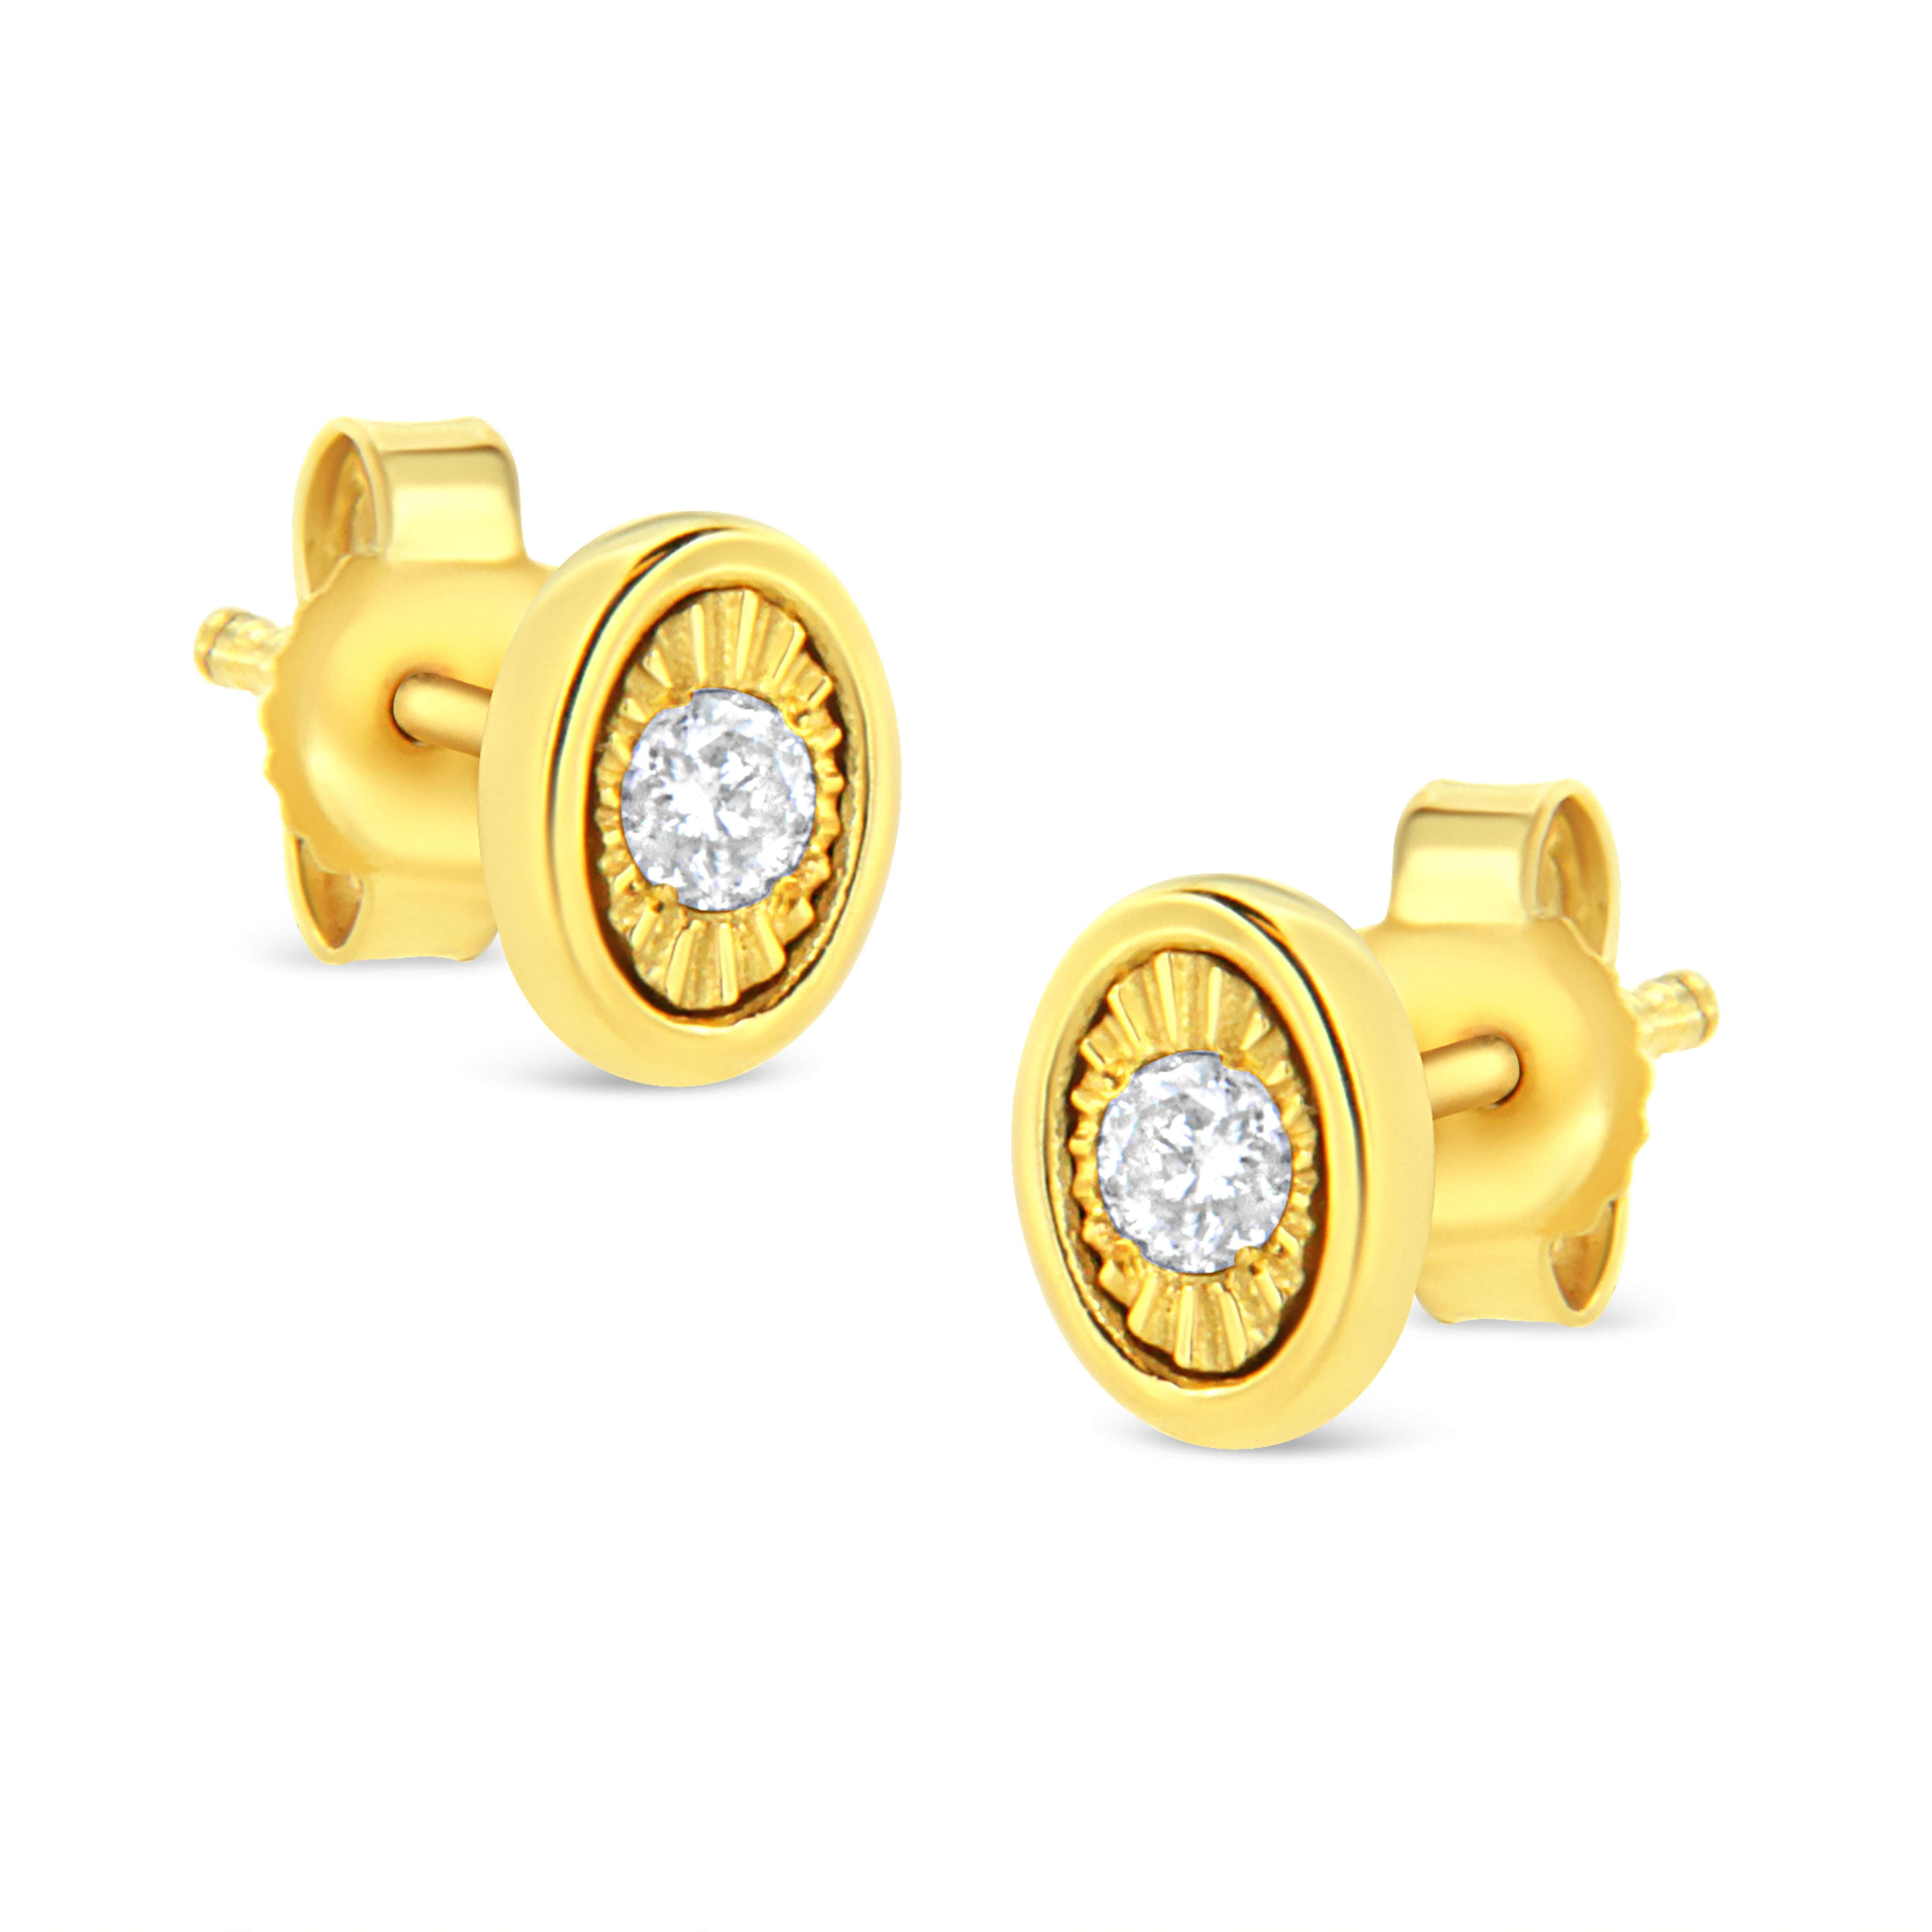 These oval shaped stud earrings are crafted in 10k yellow gold plated sterling silver and feature 1/10ct TDW of diamonds. Each earring features a single sparkling round cut diamond in a miracle setting that adds to the earrings sparkle. A polished